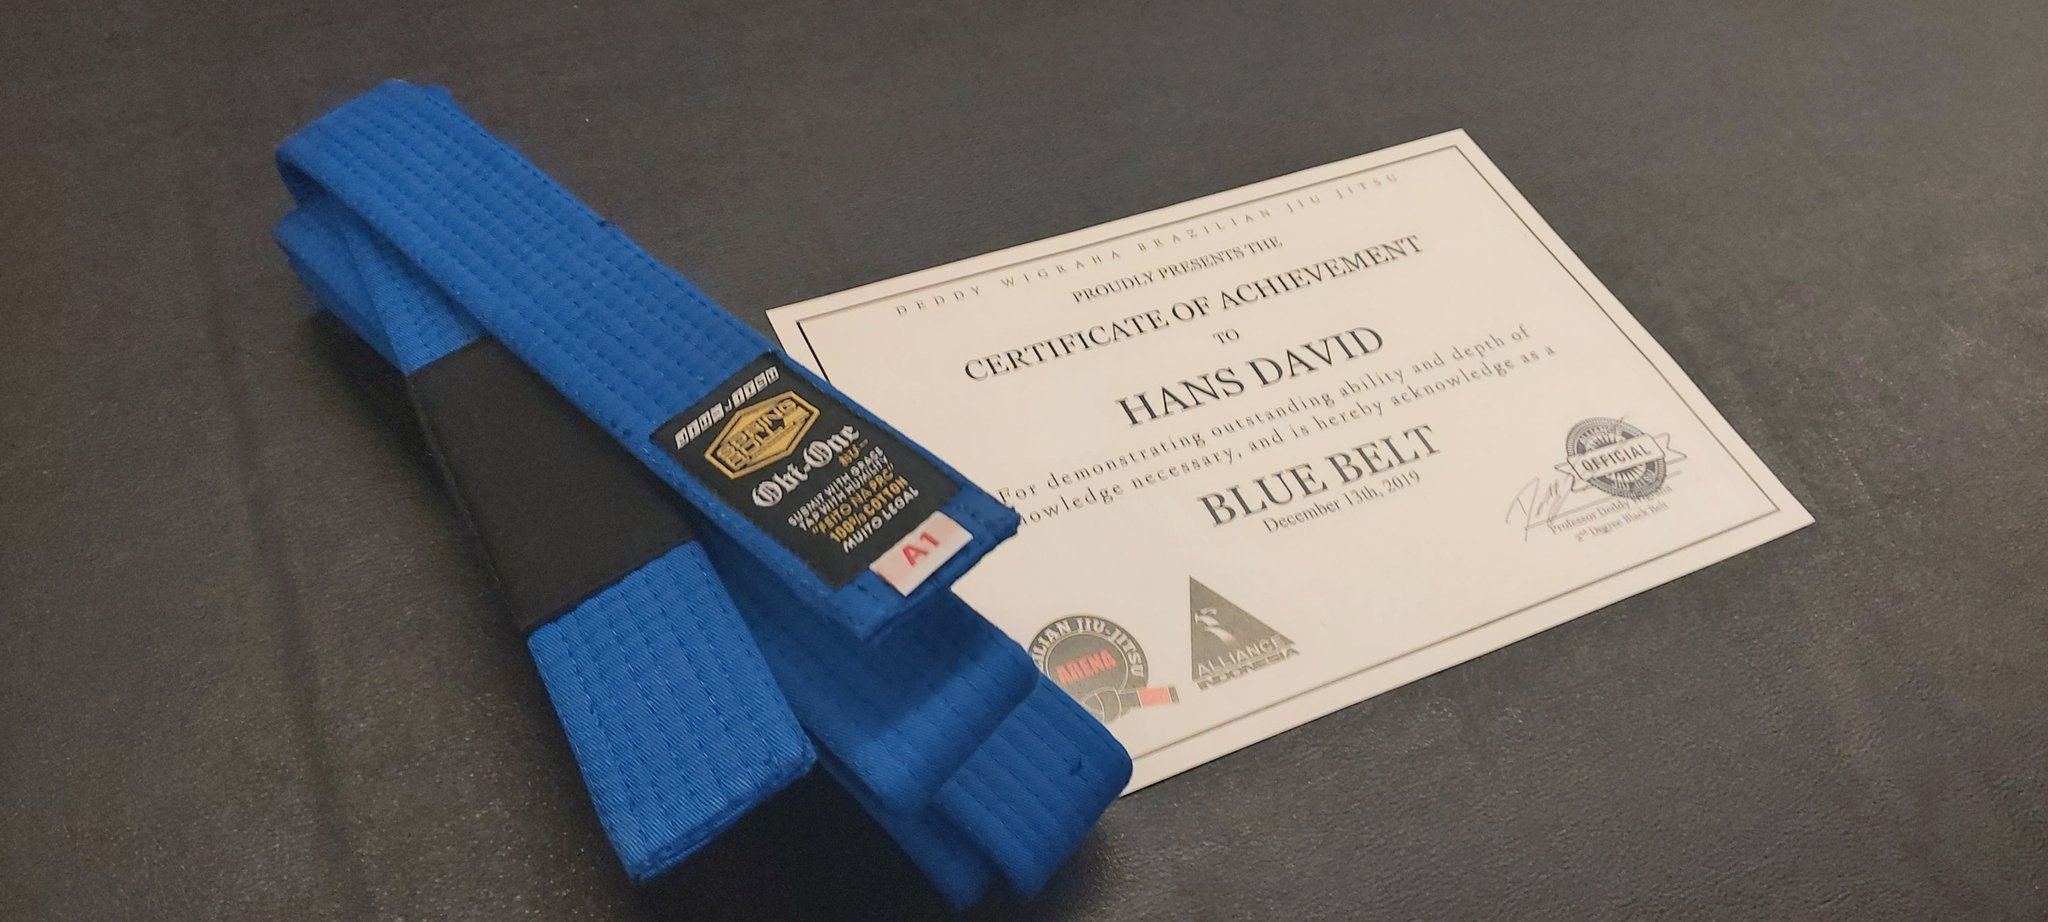 How To Become a BJJ Blue Belt